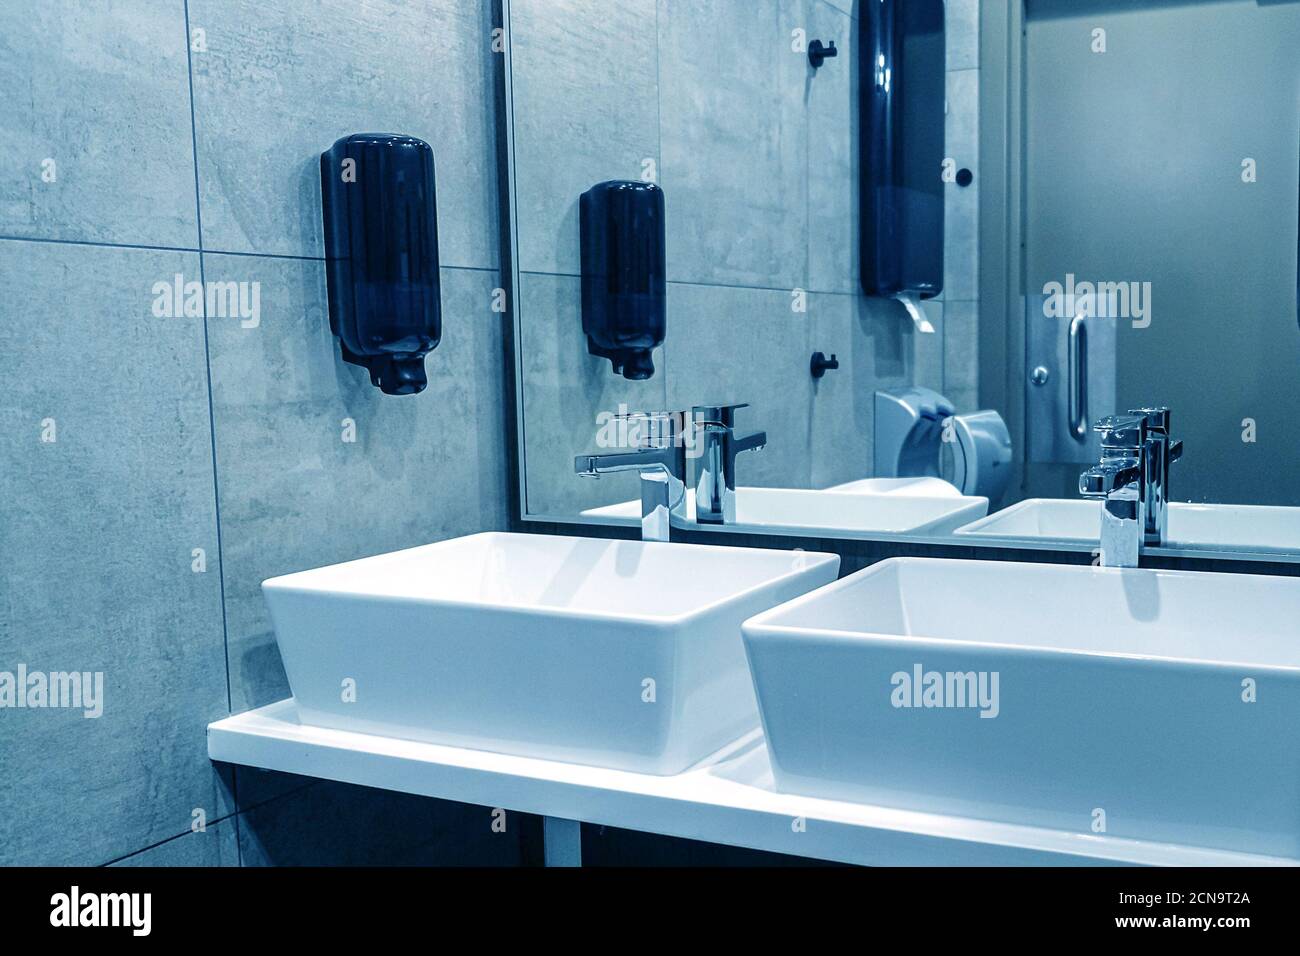 Modern sinks with a mirror in a public toilet. Bachelor's reflection in the mirrors Stock Photo